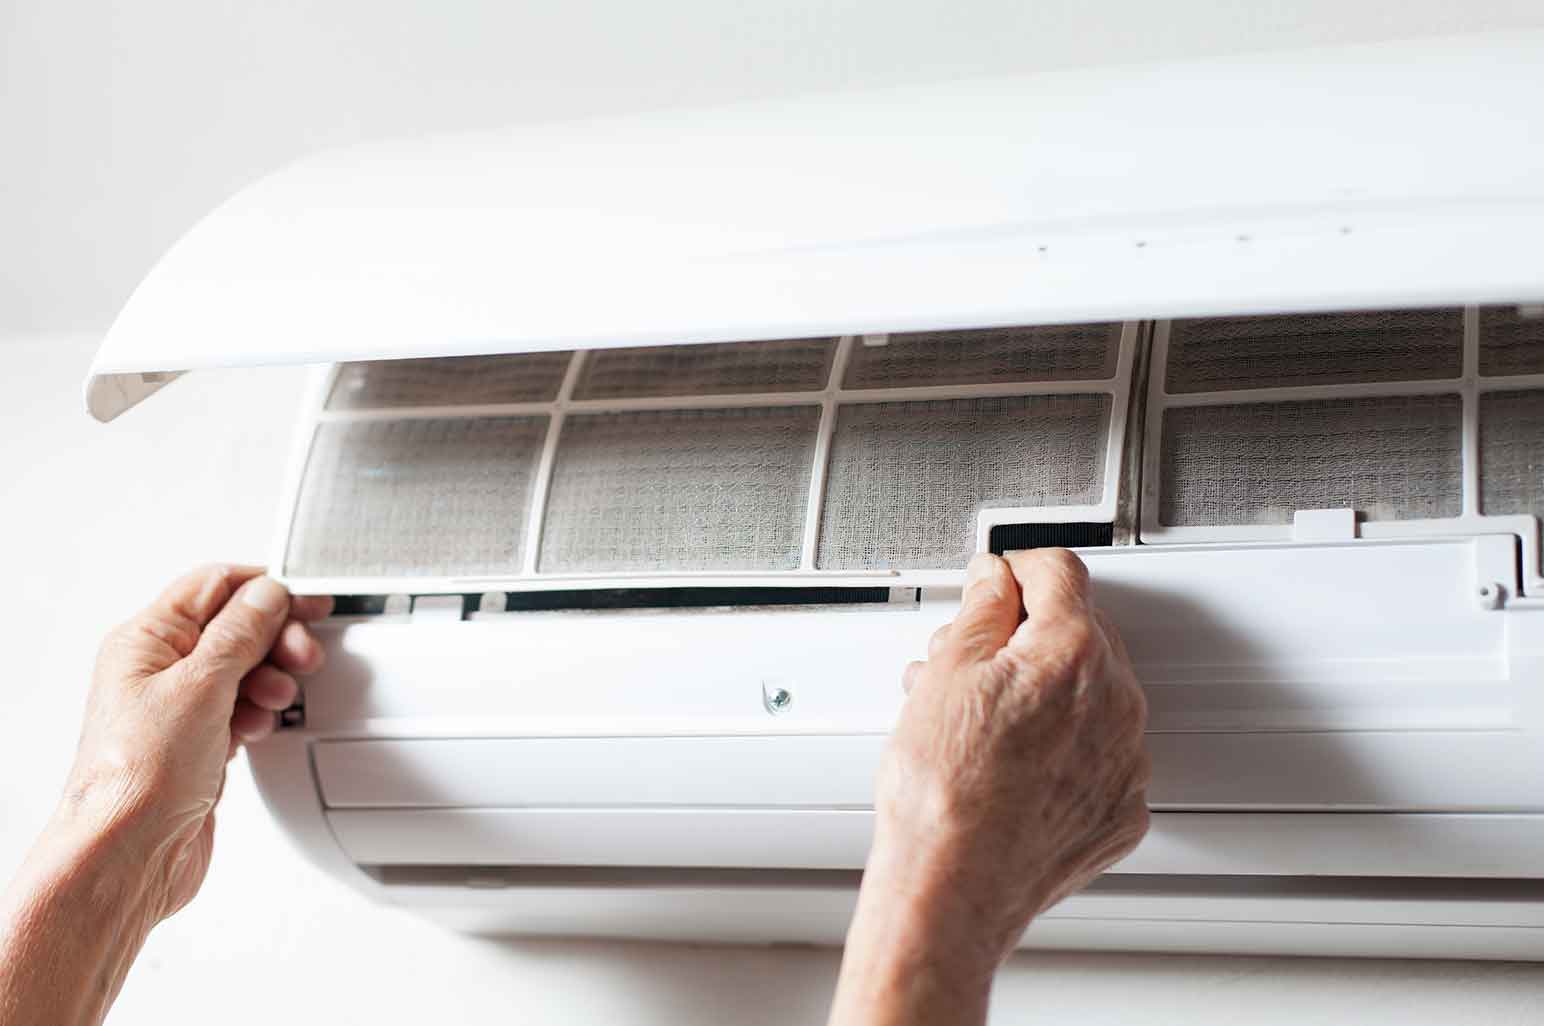 Purifier vs. Filter: Which Can Improve Indoor Air Quality